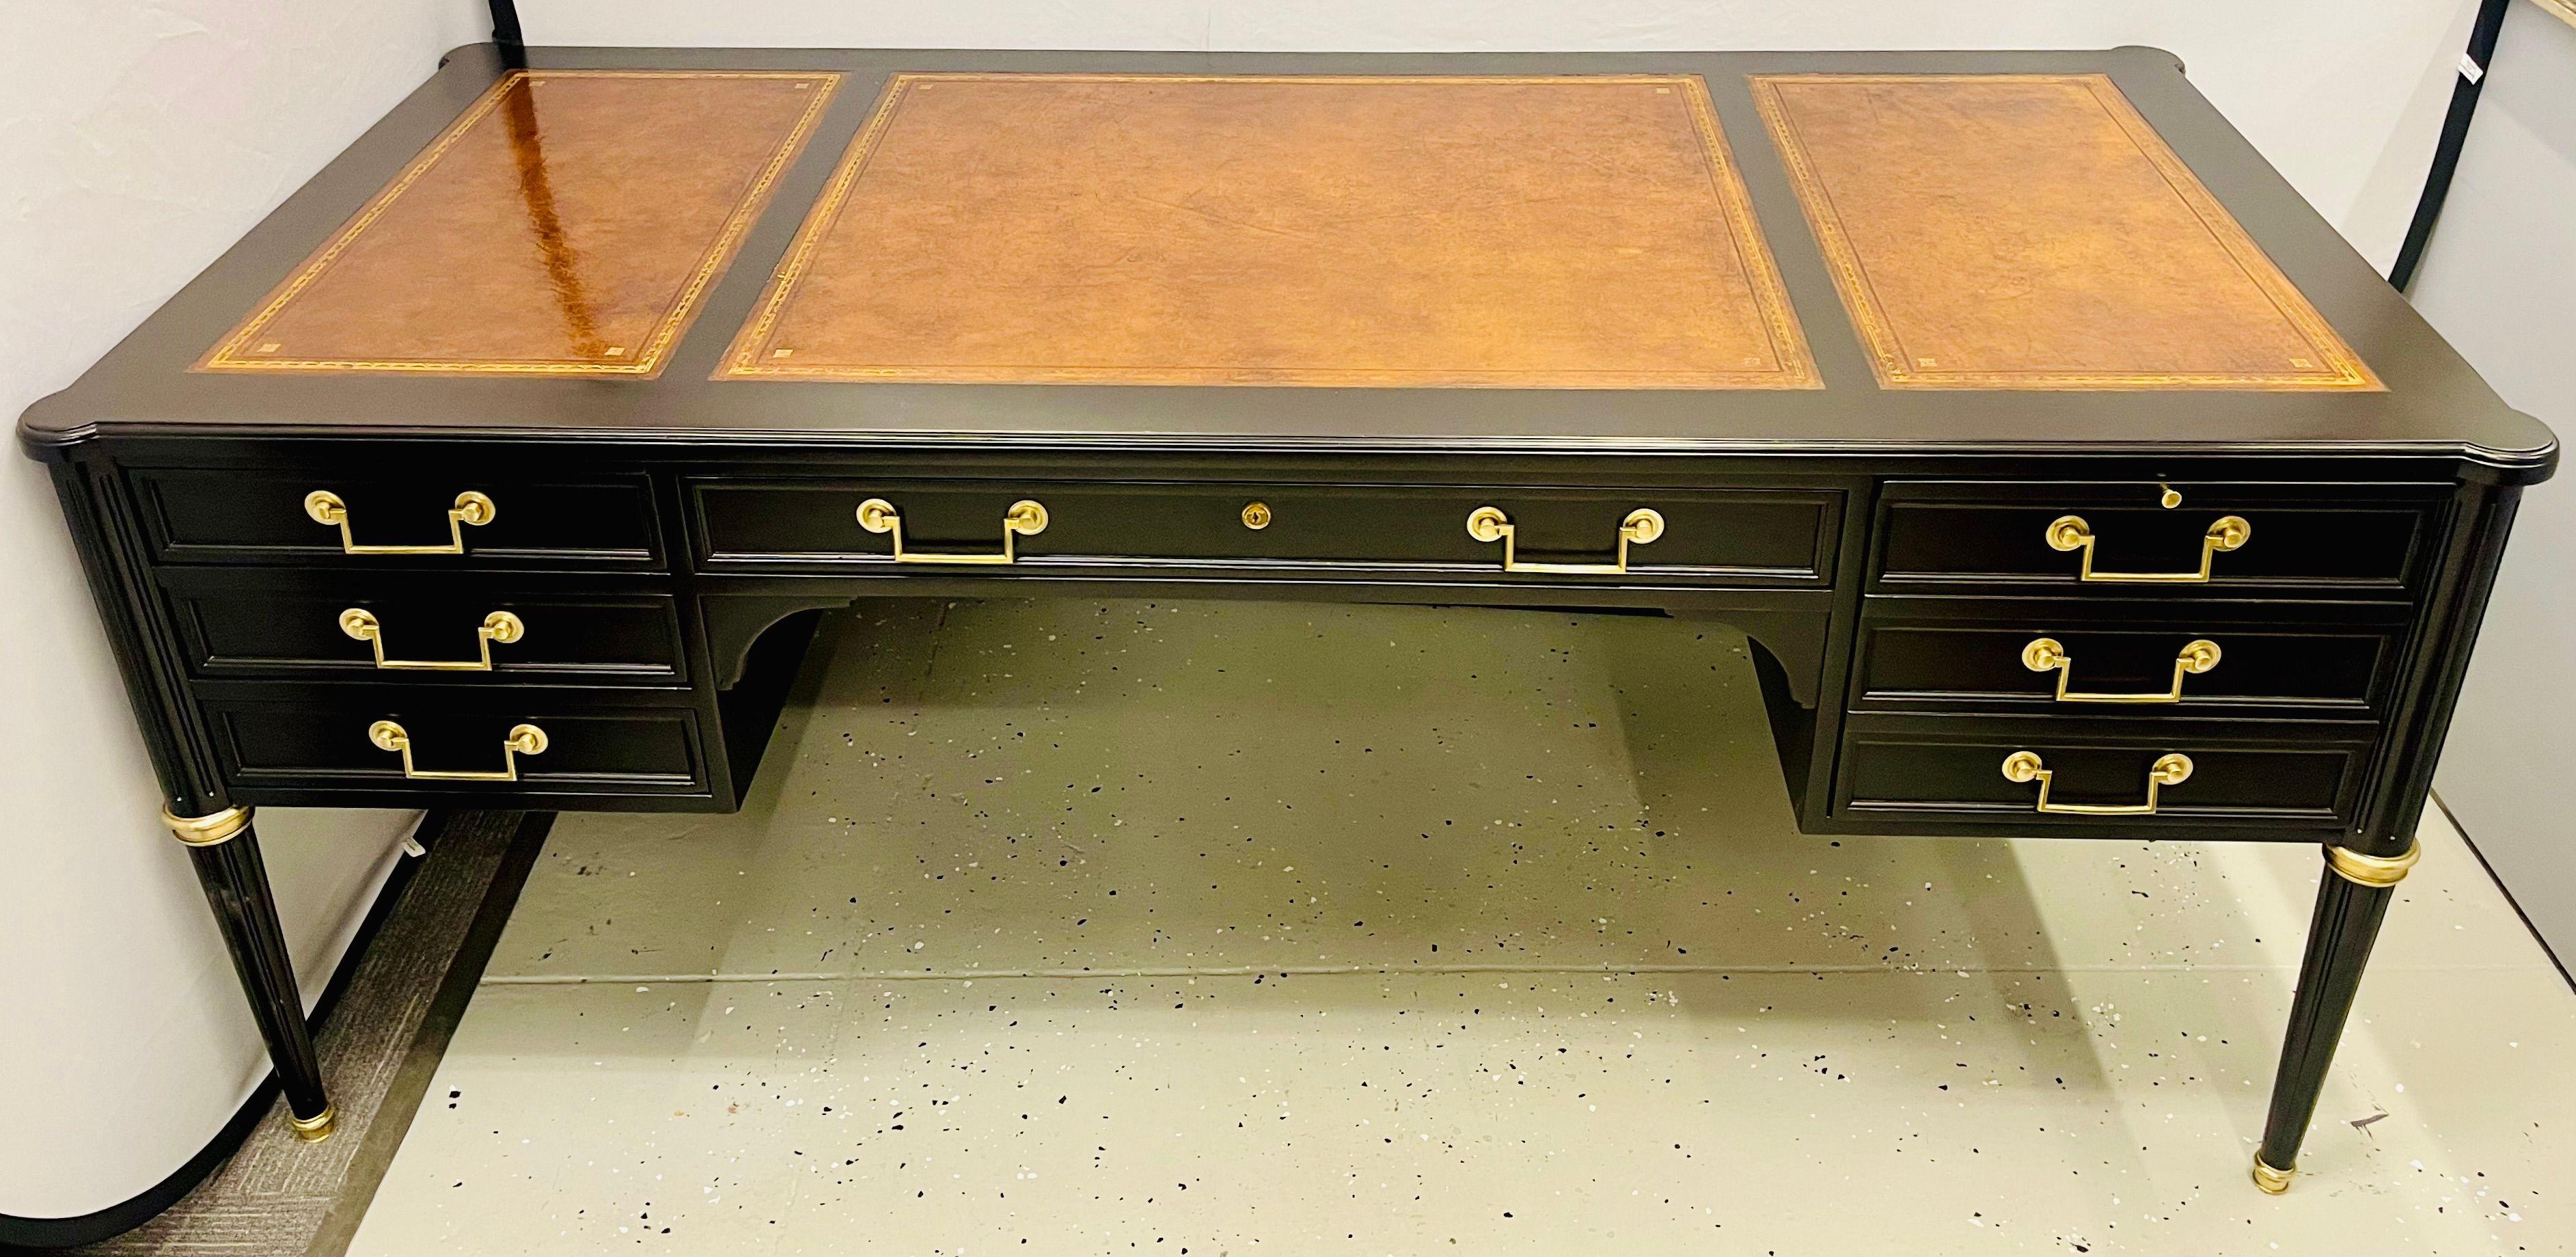 Hollywood Regency Style Desk in the manner or Maison Jansen. A large and impressive ebony partner desk with a nicely worn warm brown Gilt tooled leather top. This Louis XVI Fashion Desk or Writing Table is simply stunning. The sleek tapering legs